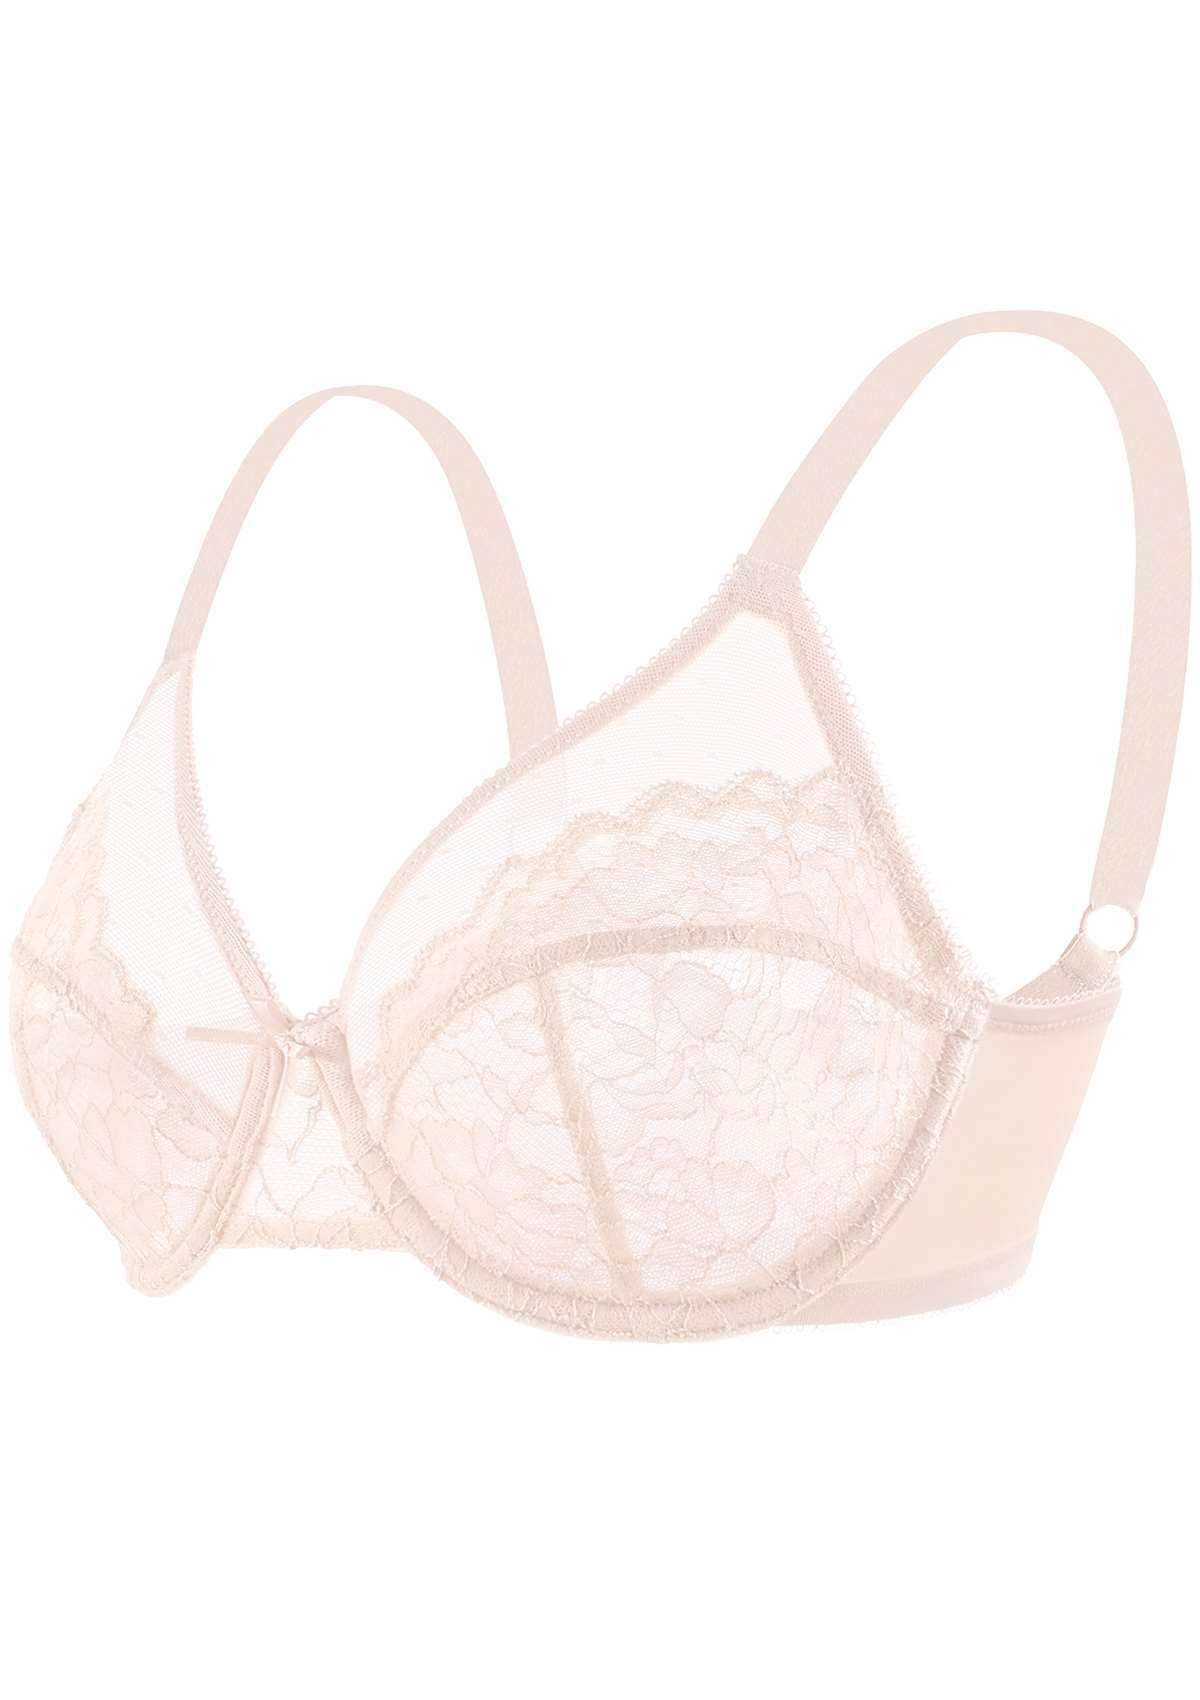 HSIA Enchante Lacy Bra: Comfy Sheer Lace Bra With Lift - Dusty Peach / 40 / C